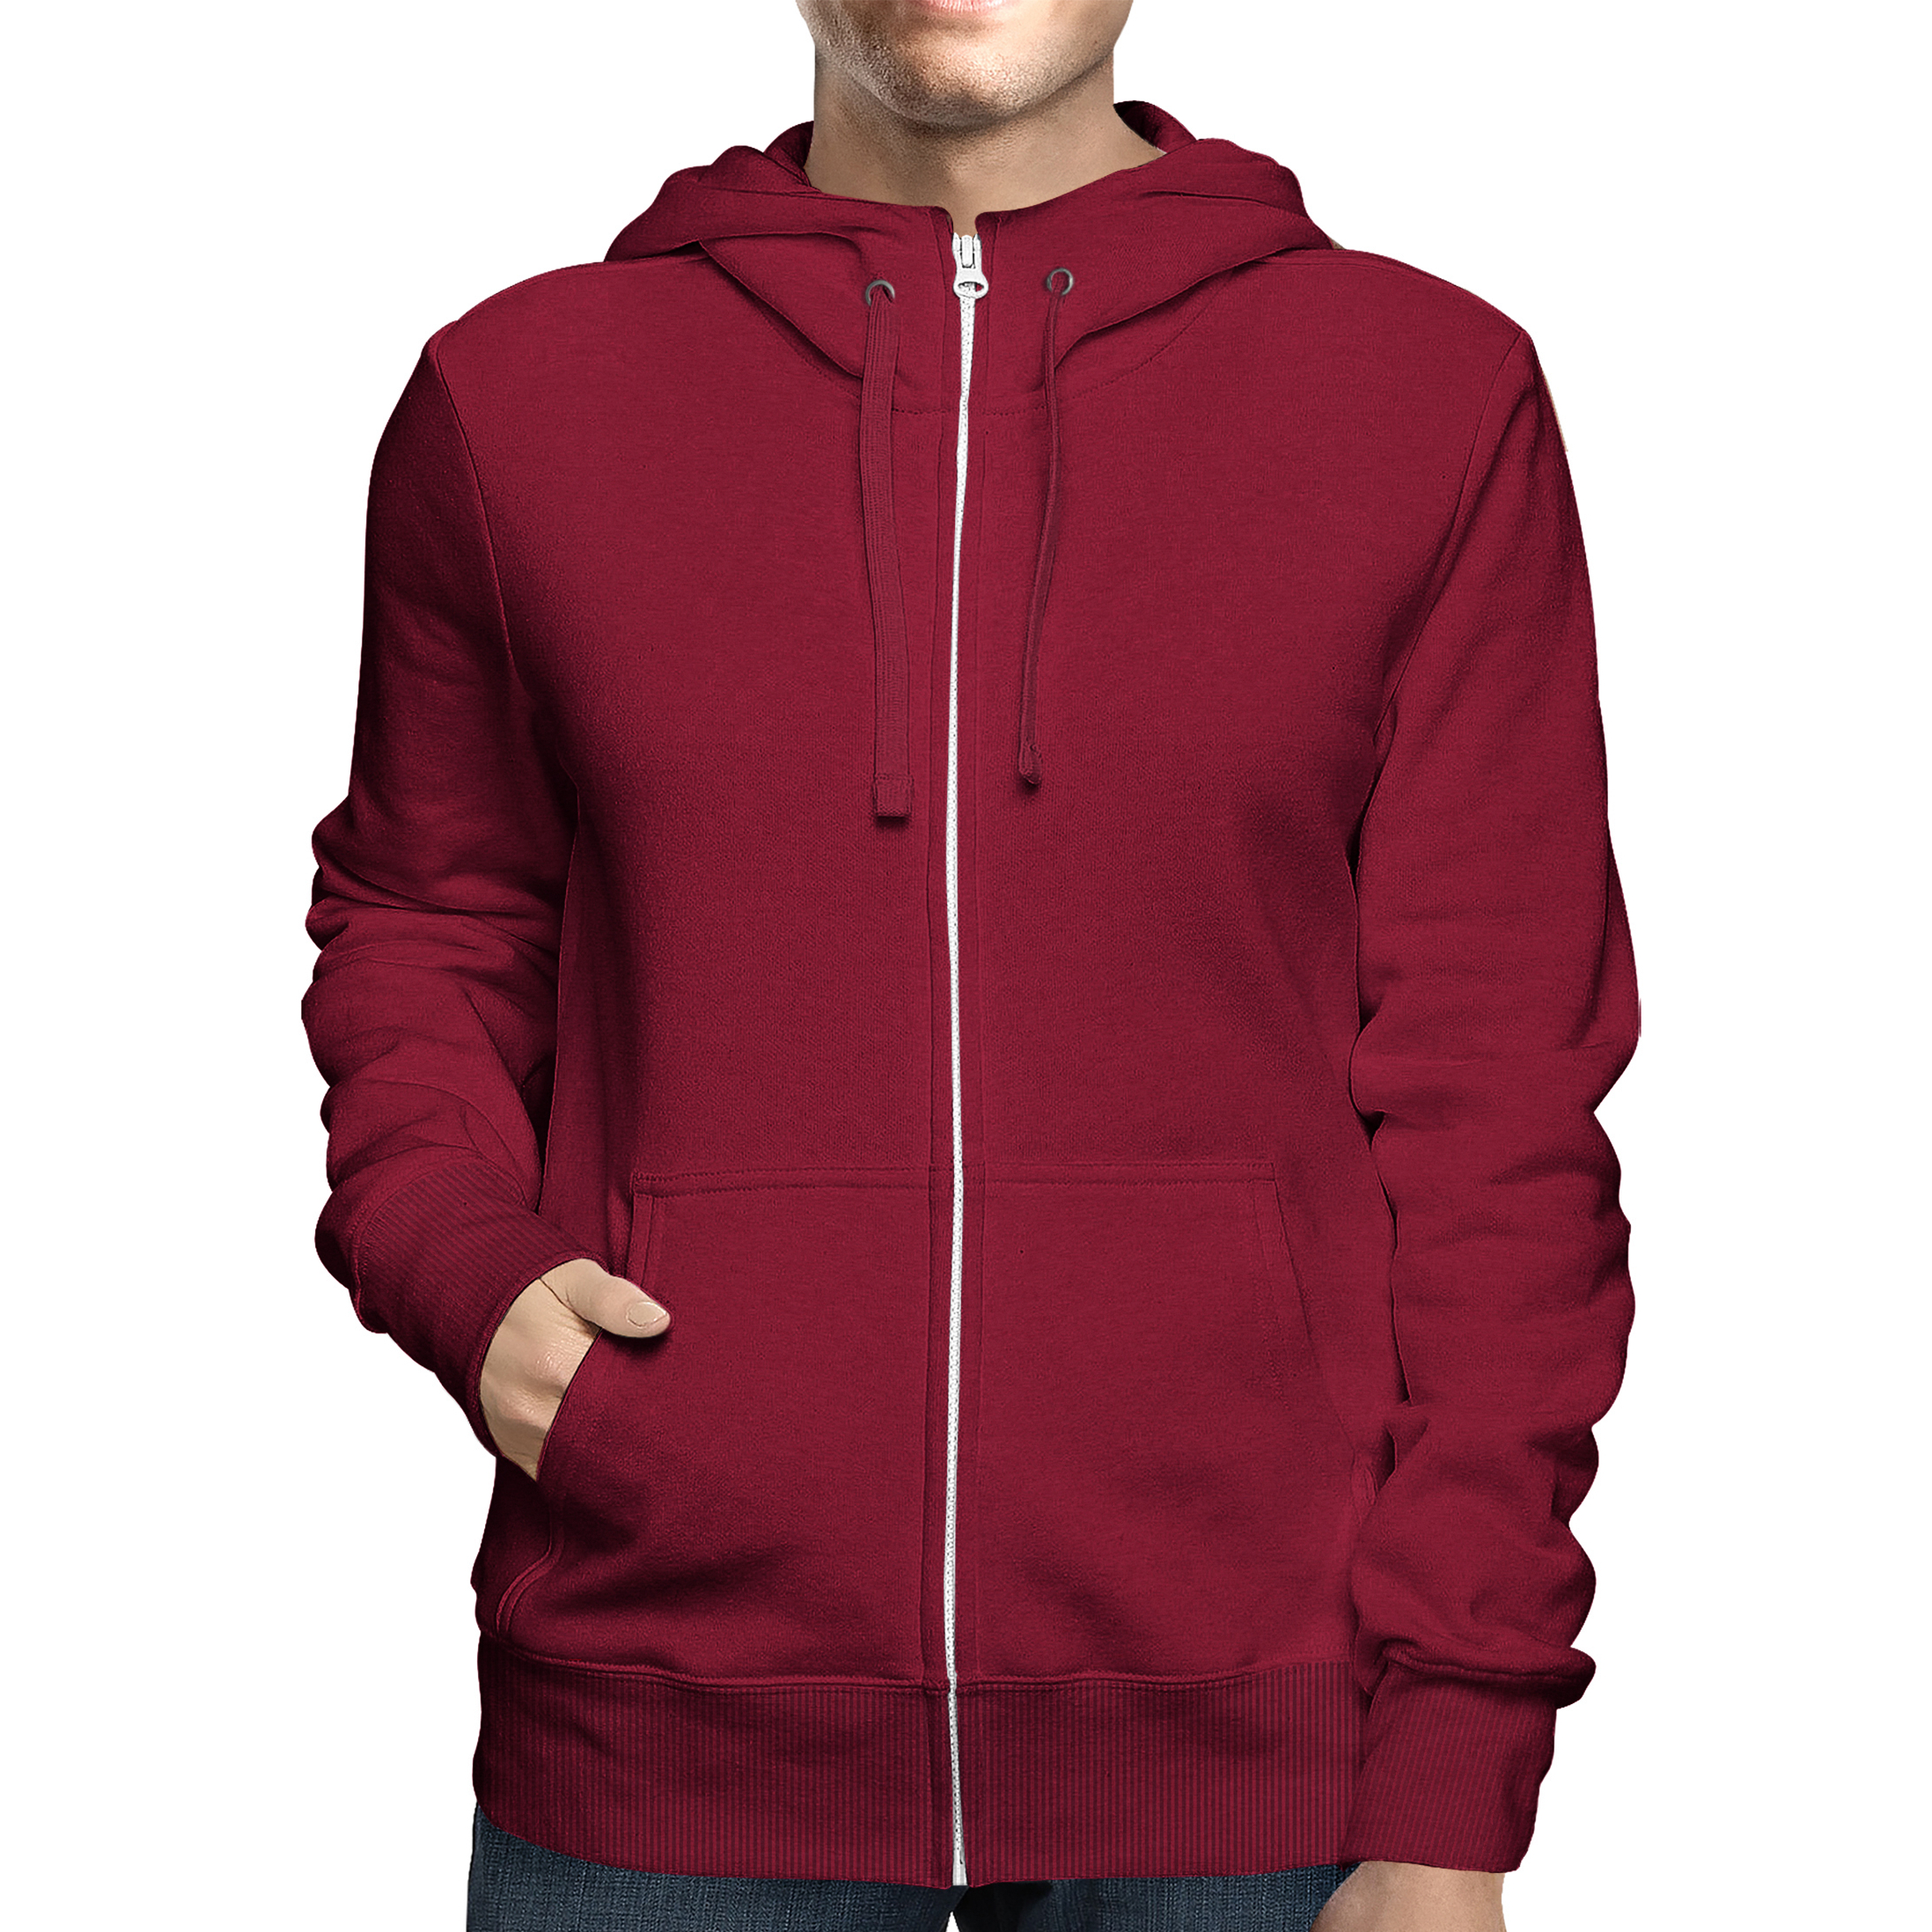 2-Pack: Men's Full Zip Up Fleece-Lined Hoodie Sweatshirt (Big & Tall Size Available) - Burgundy, 3x-large